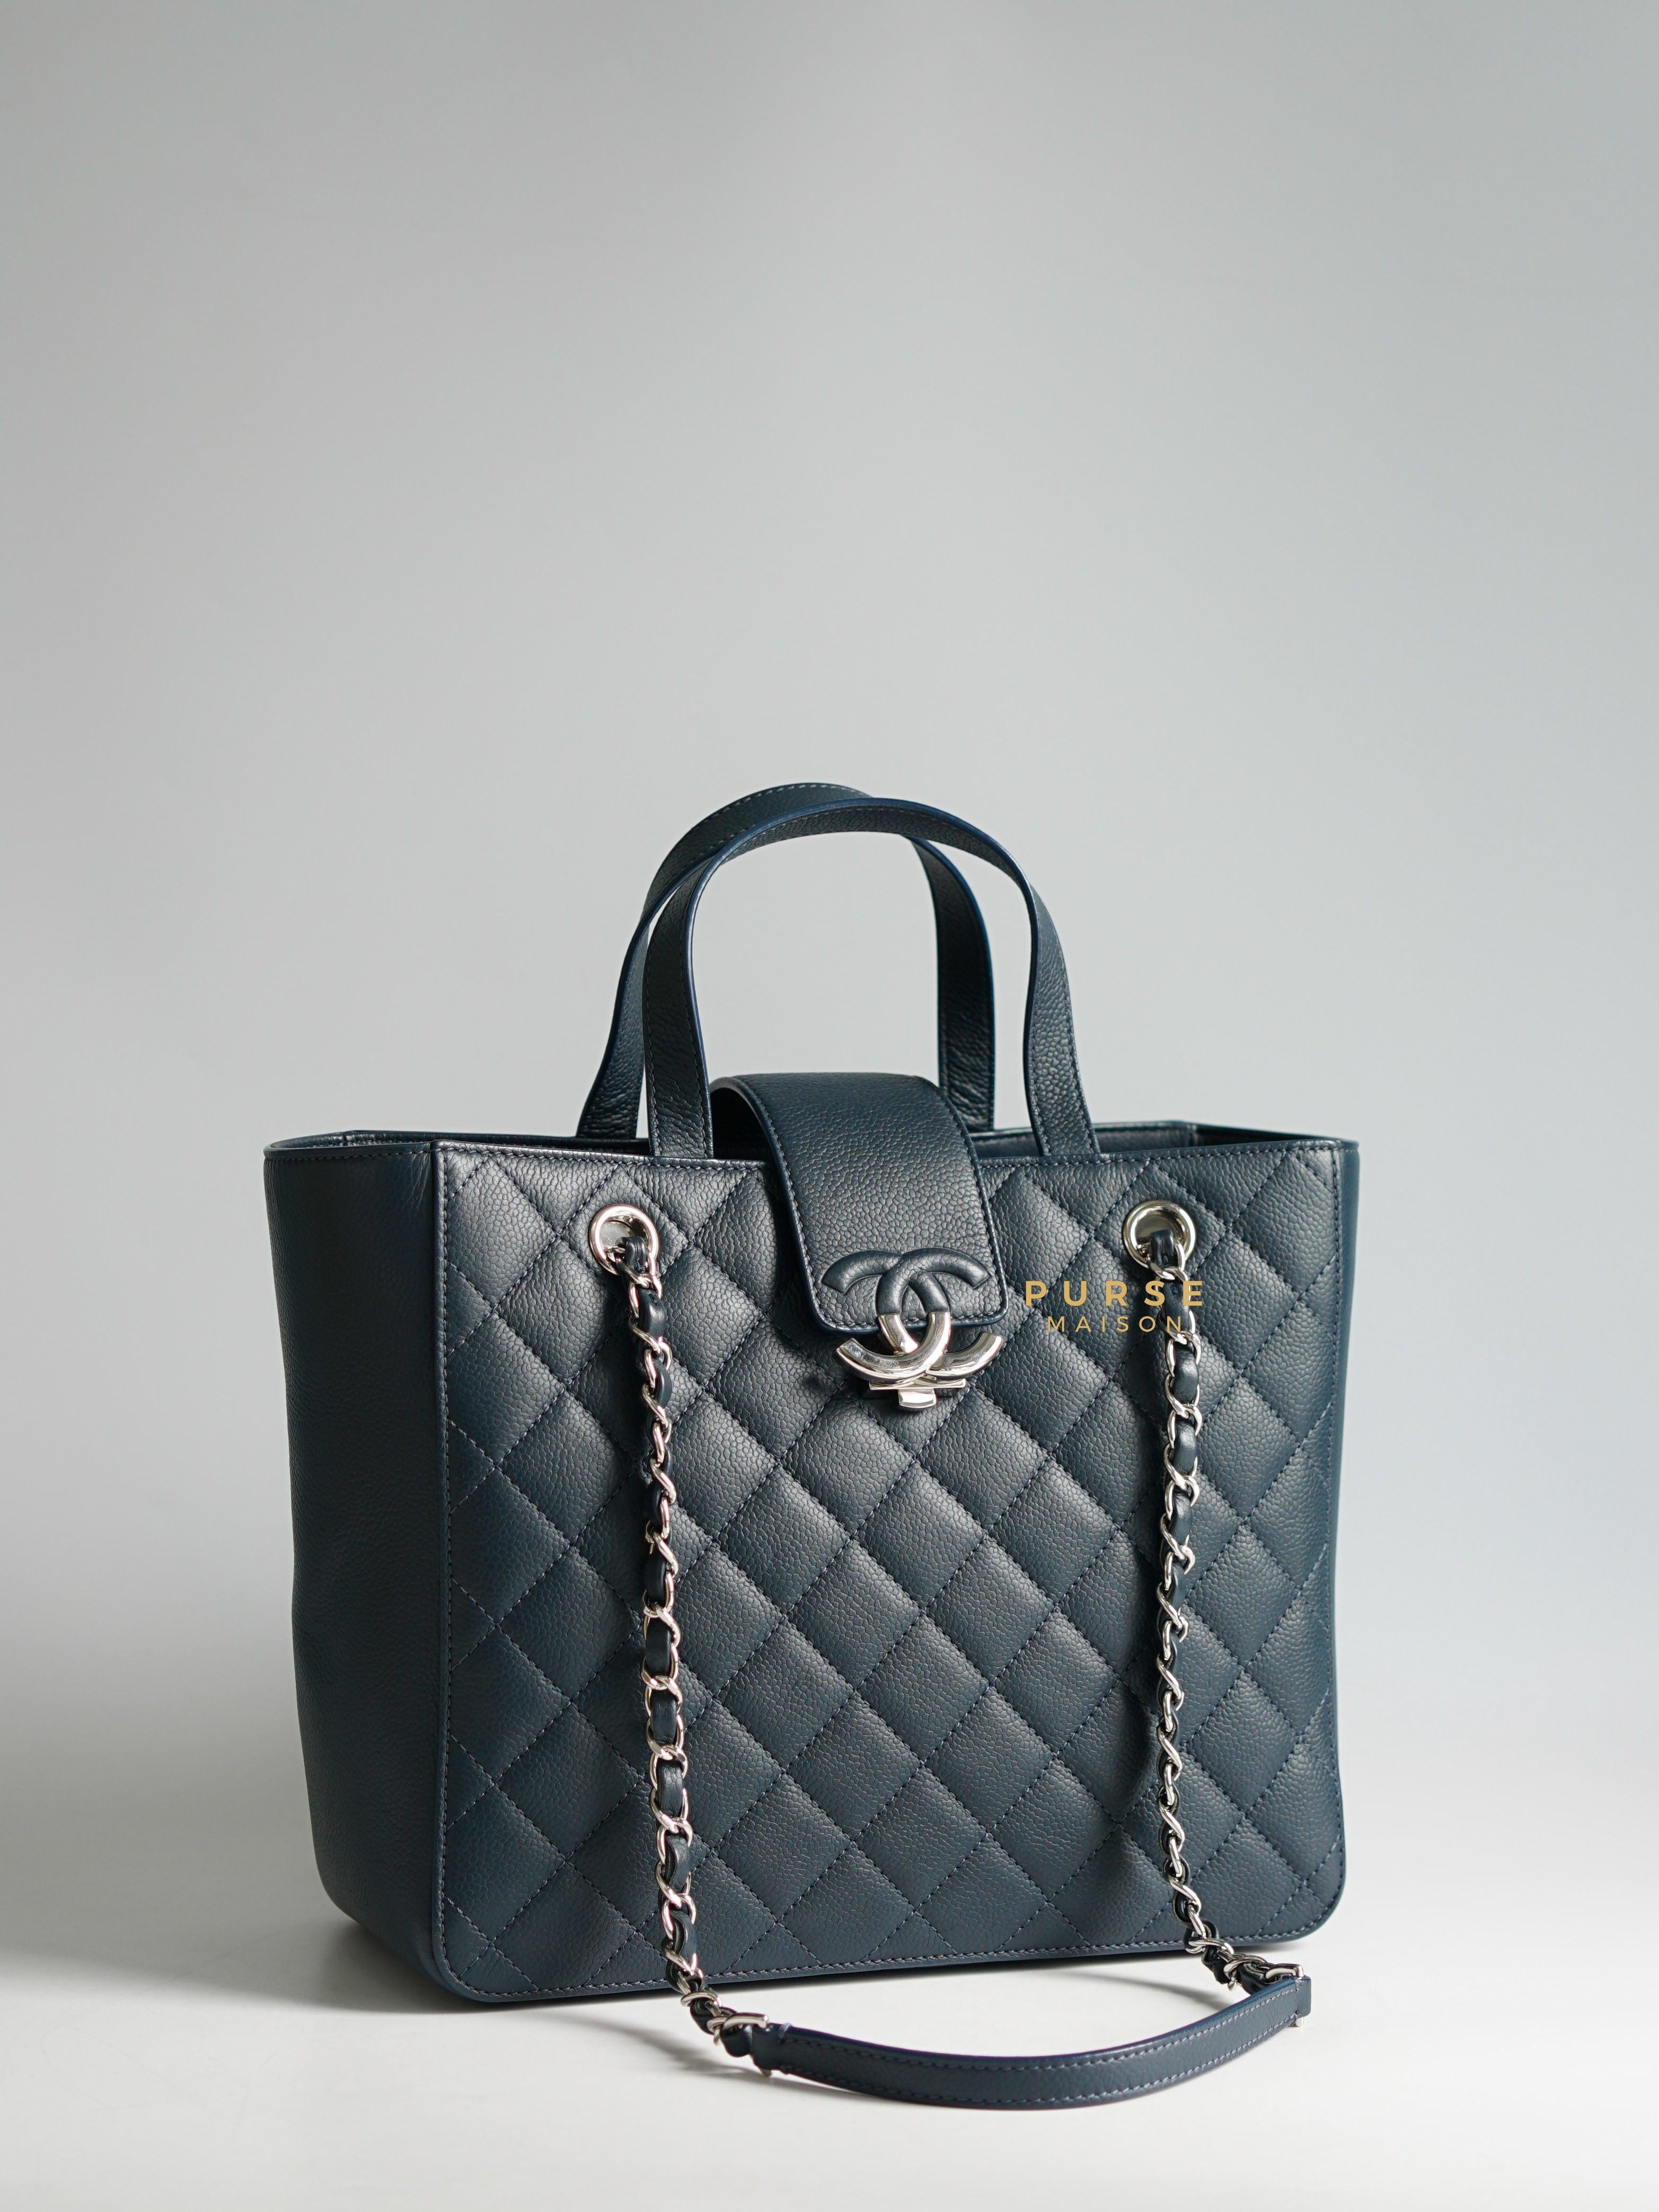 Chanel Small CC Box Shopping Tote Navy Blue Caviar & Silver Hardware Series 24 | Purse Maison Luxury Bags Shop